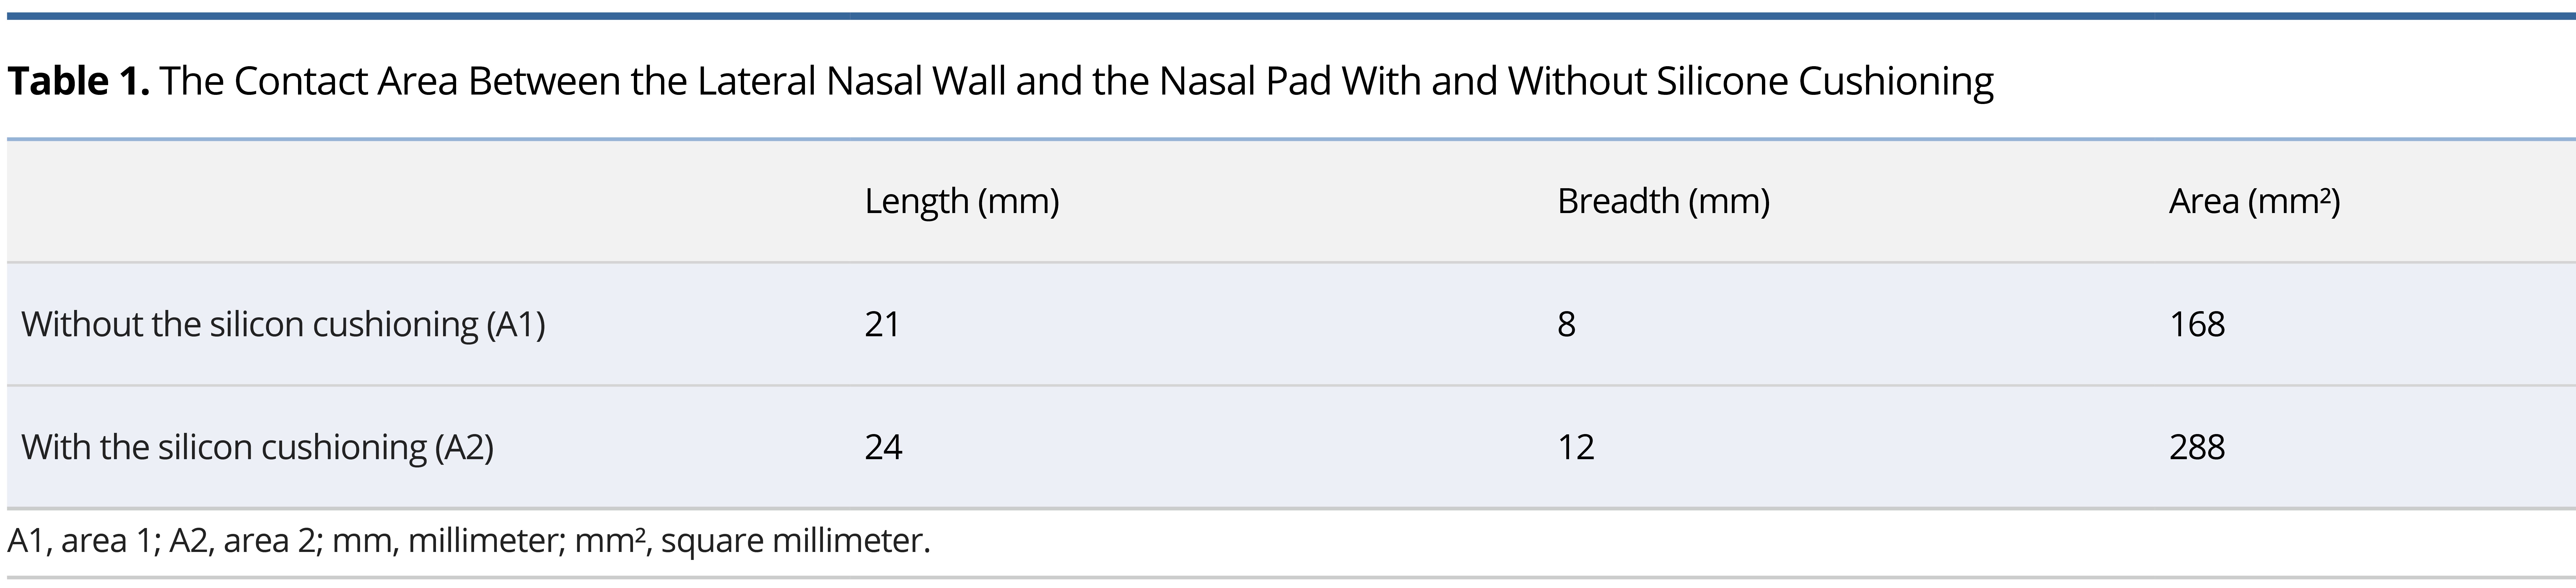 Table 1.jpgThe Contact Area Between the Lateral Nasal Wall and the Nasal Pad With and Without Silicone Cushioning